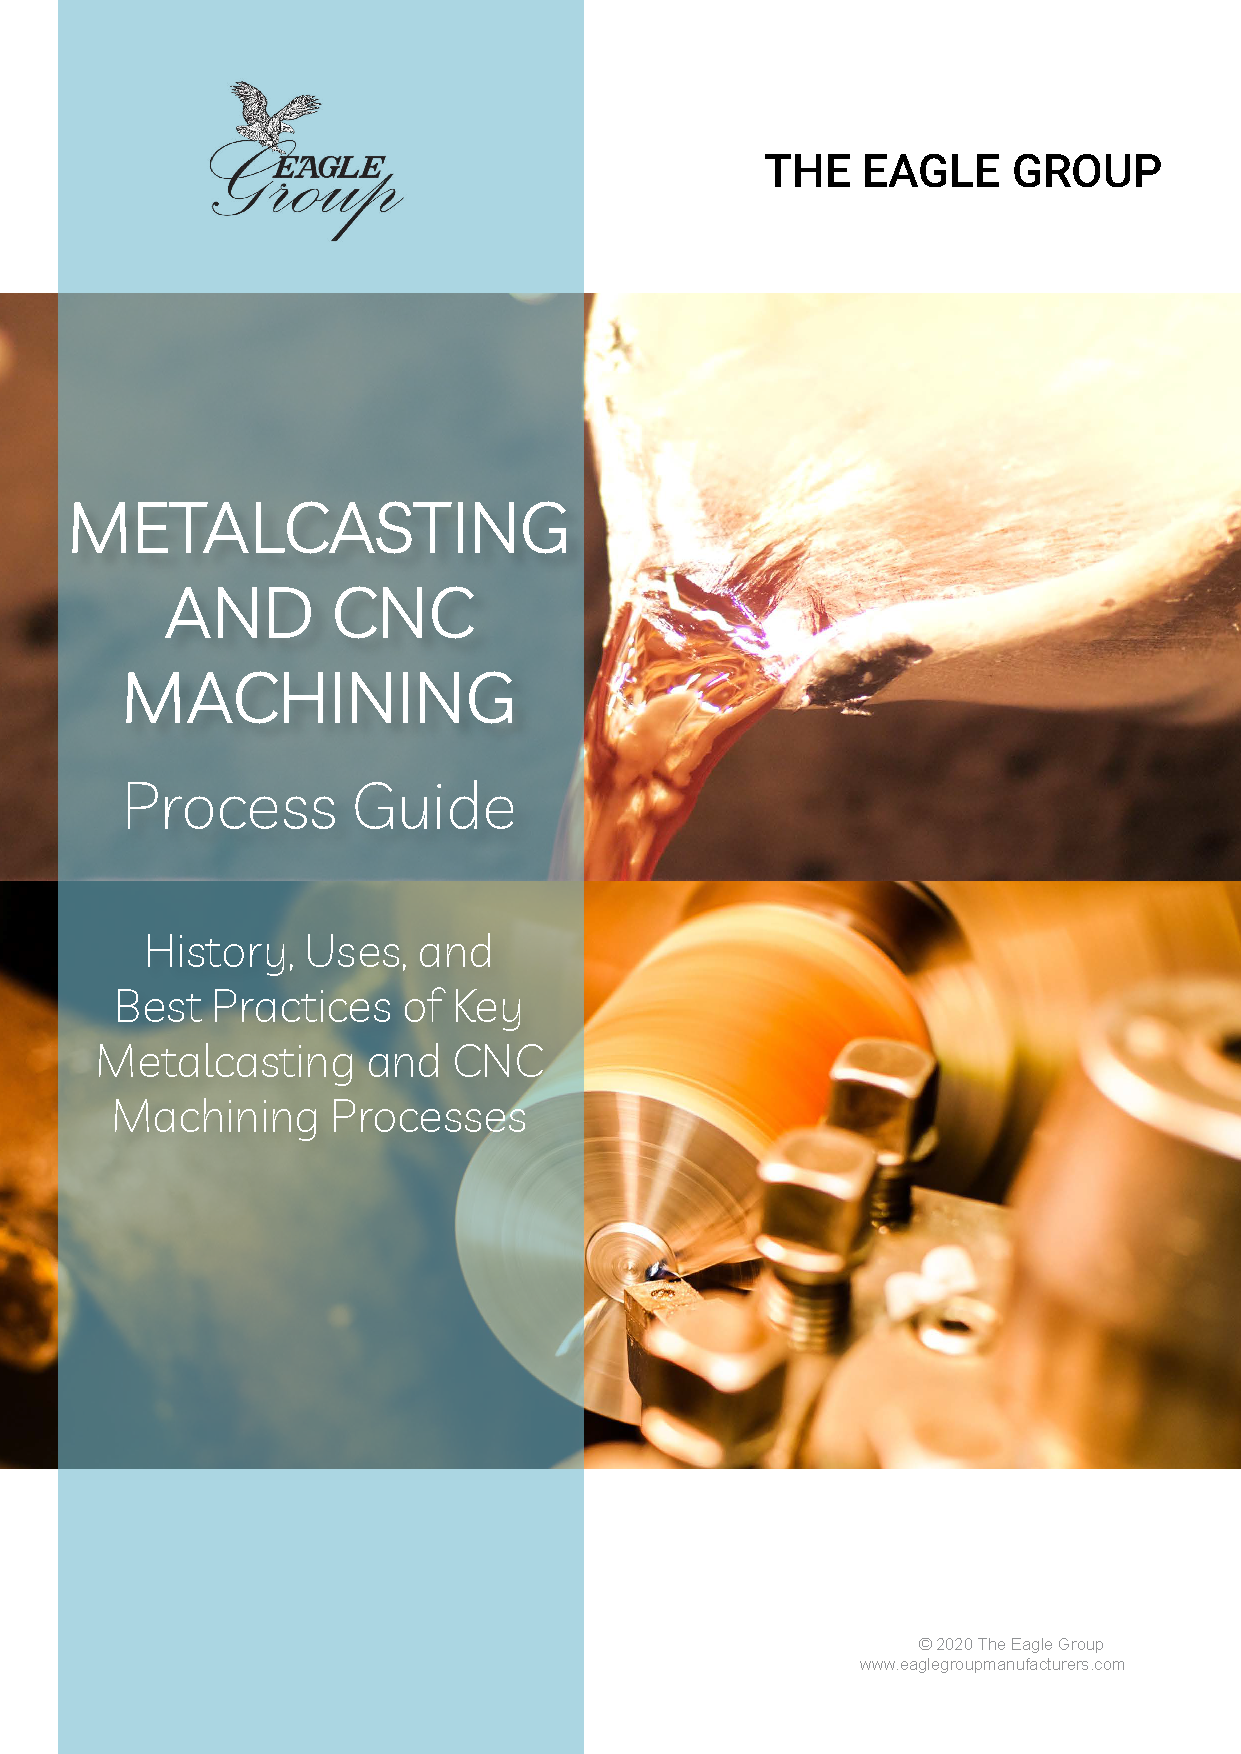 History, Uses, and Best Practices of Key Metalcasting and CNC Machining Processes(图1)